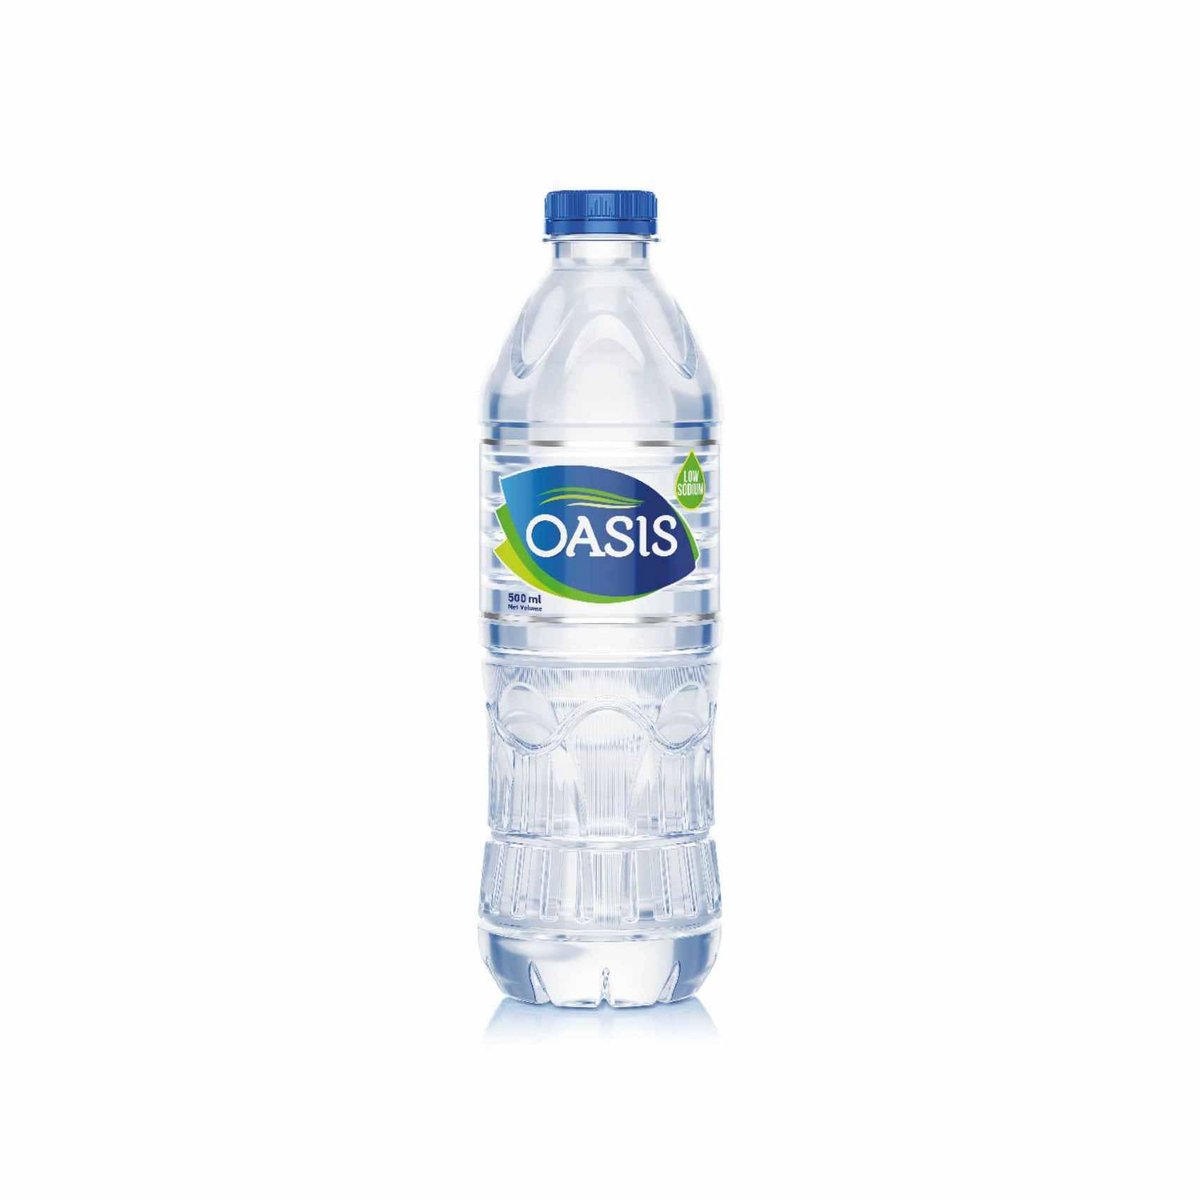 Oasis Drinking Water Value Pack 12 x 500 ml